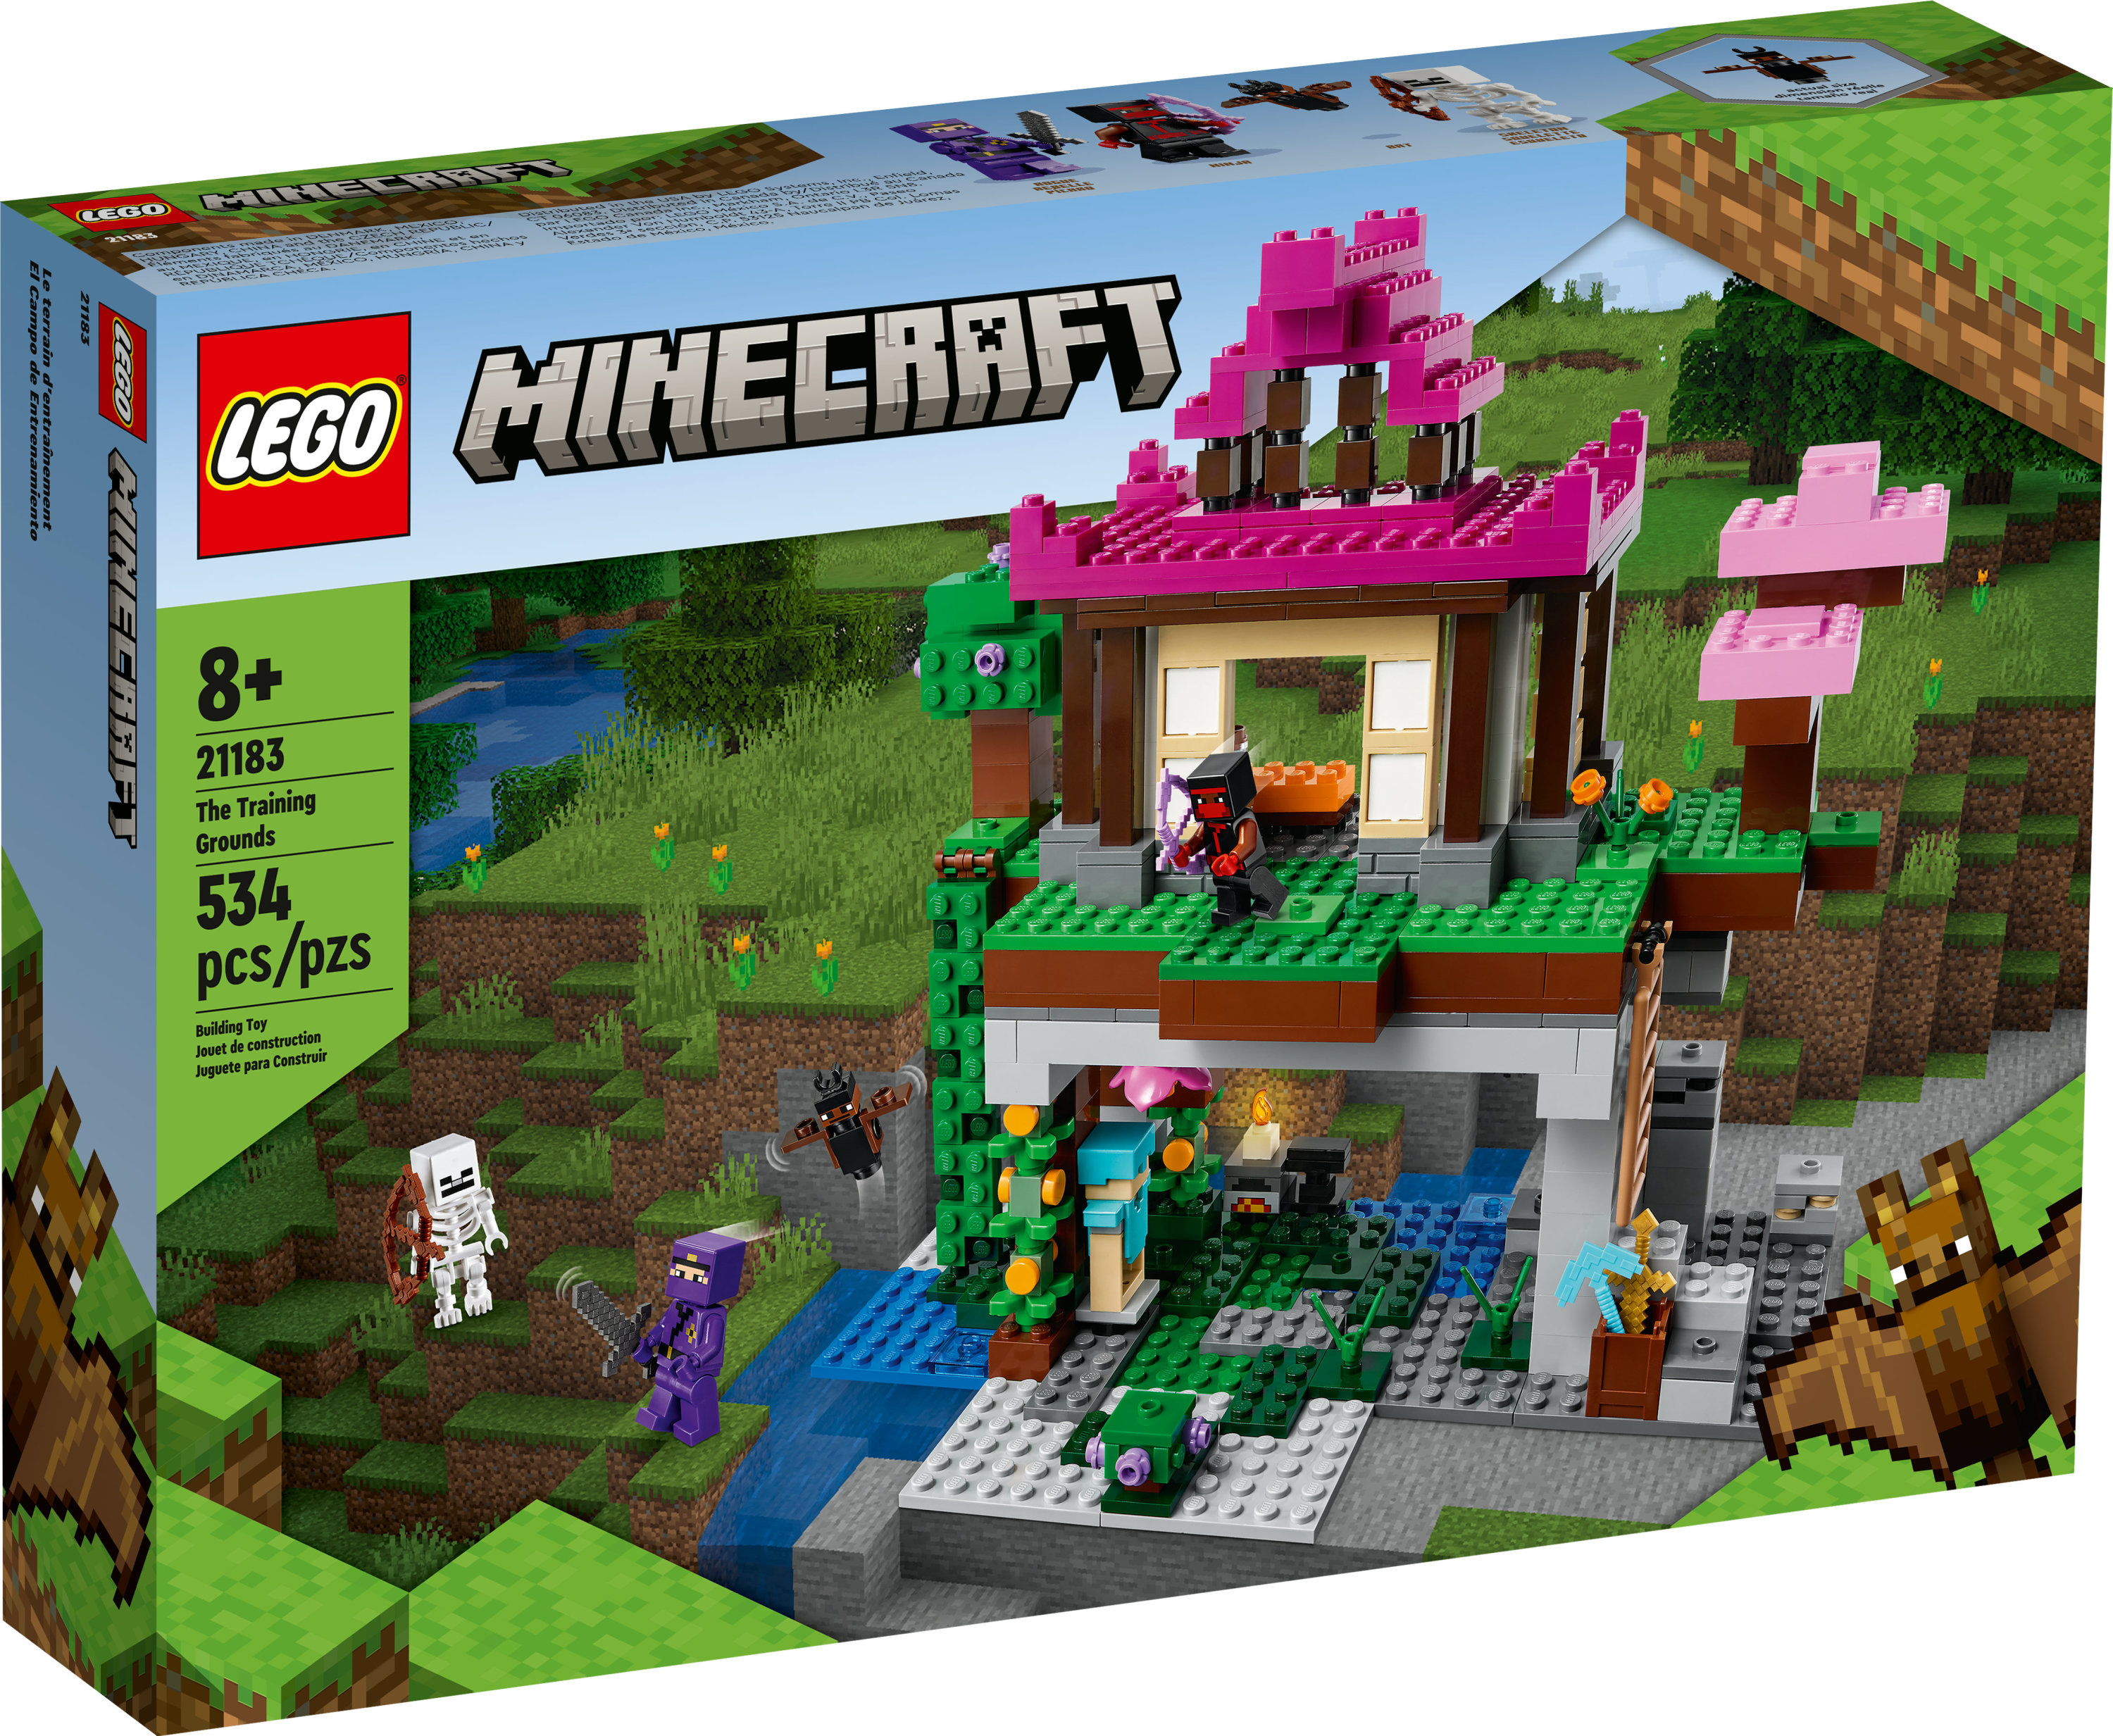 LEGO Minecraft The Training Grounds House Building Set, 21183 Cave Toy - image 3 of 8